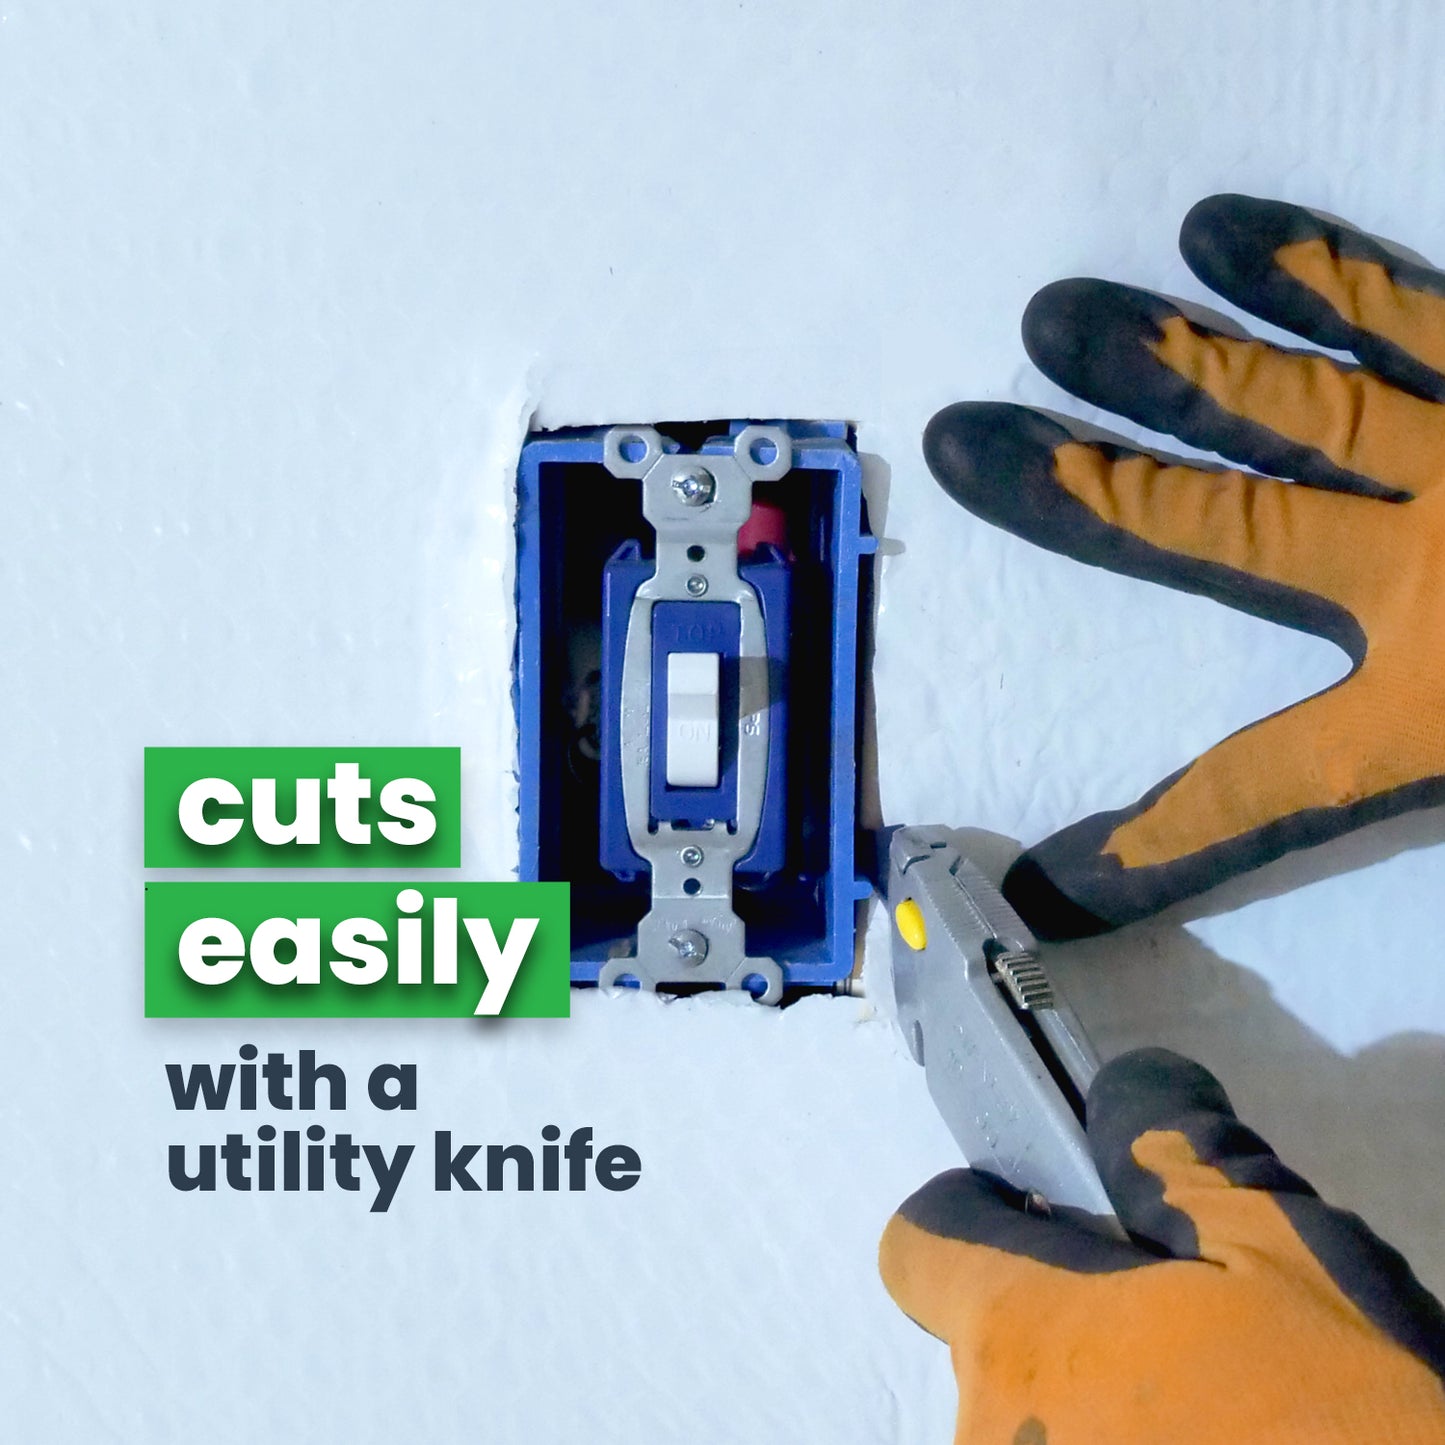 single bubble cuts easily with a utility knife